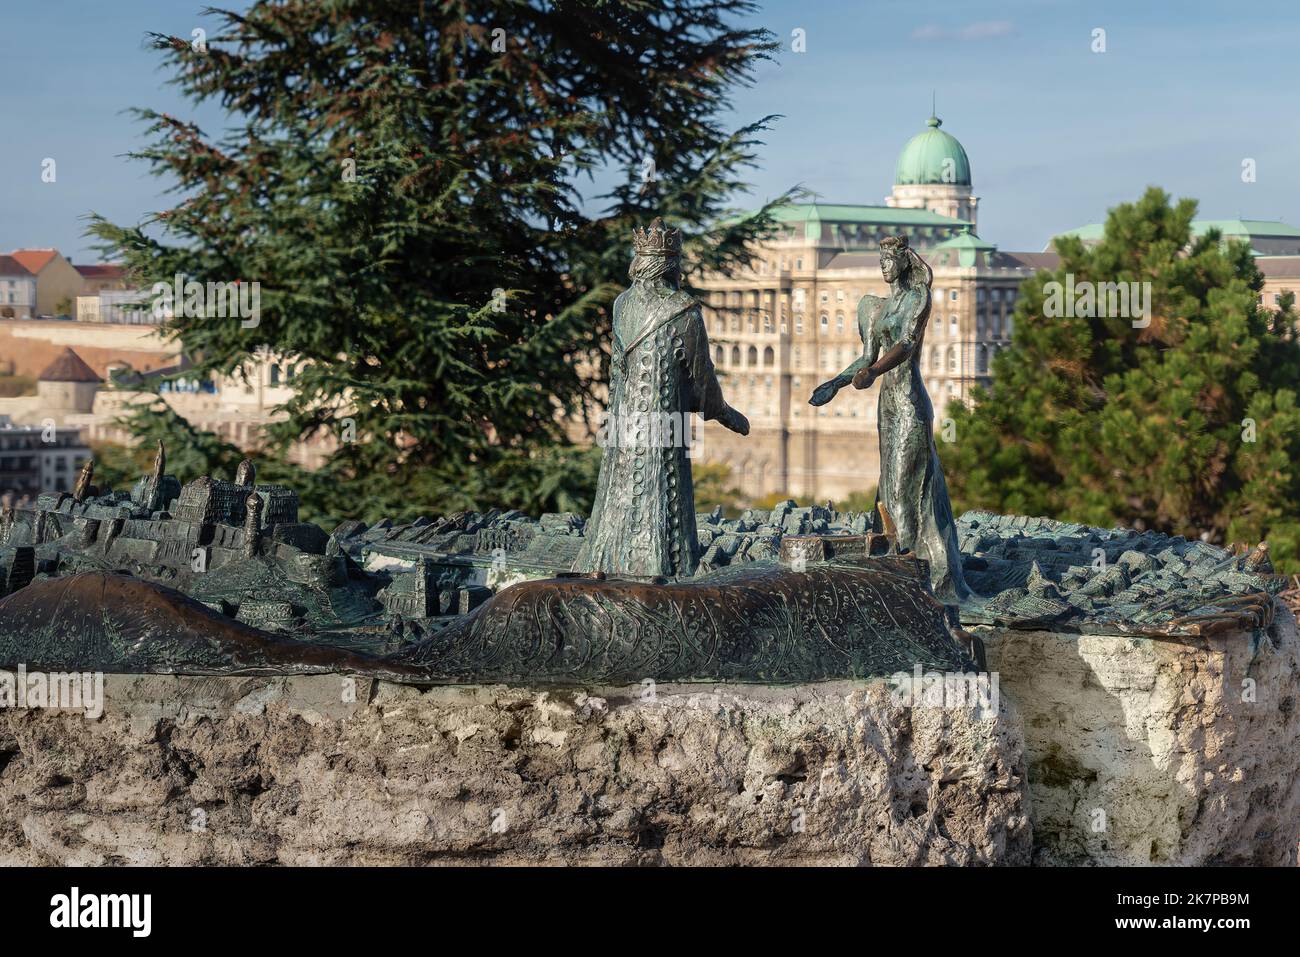 Sculpture of Prince Buda and Princess Pest at Gellert Hill - created by Martha Lesenyei in 1982 - Budapest, Hungary Stock Photo